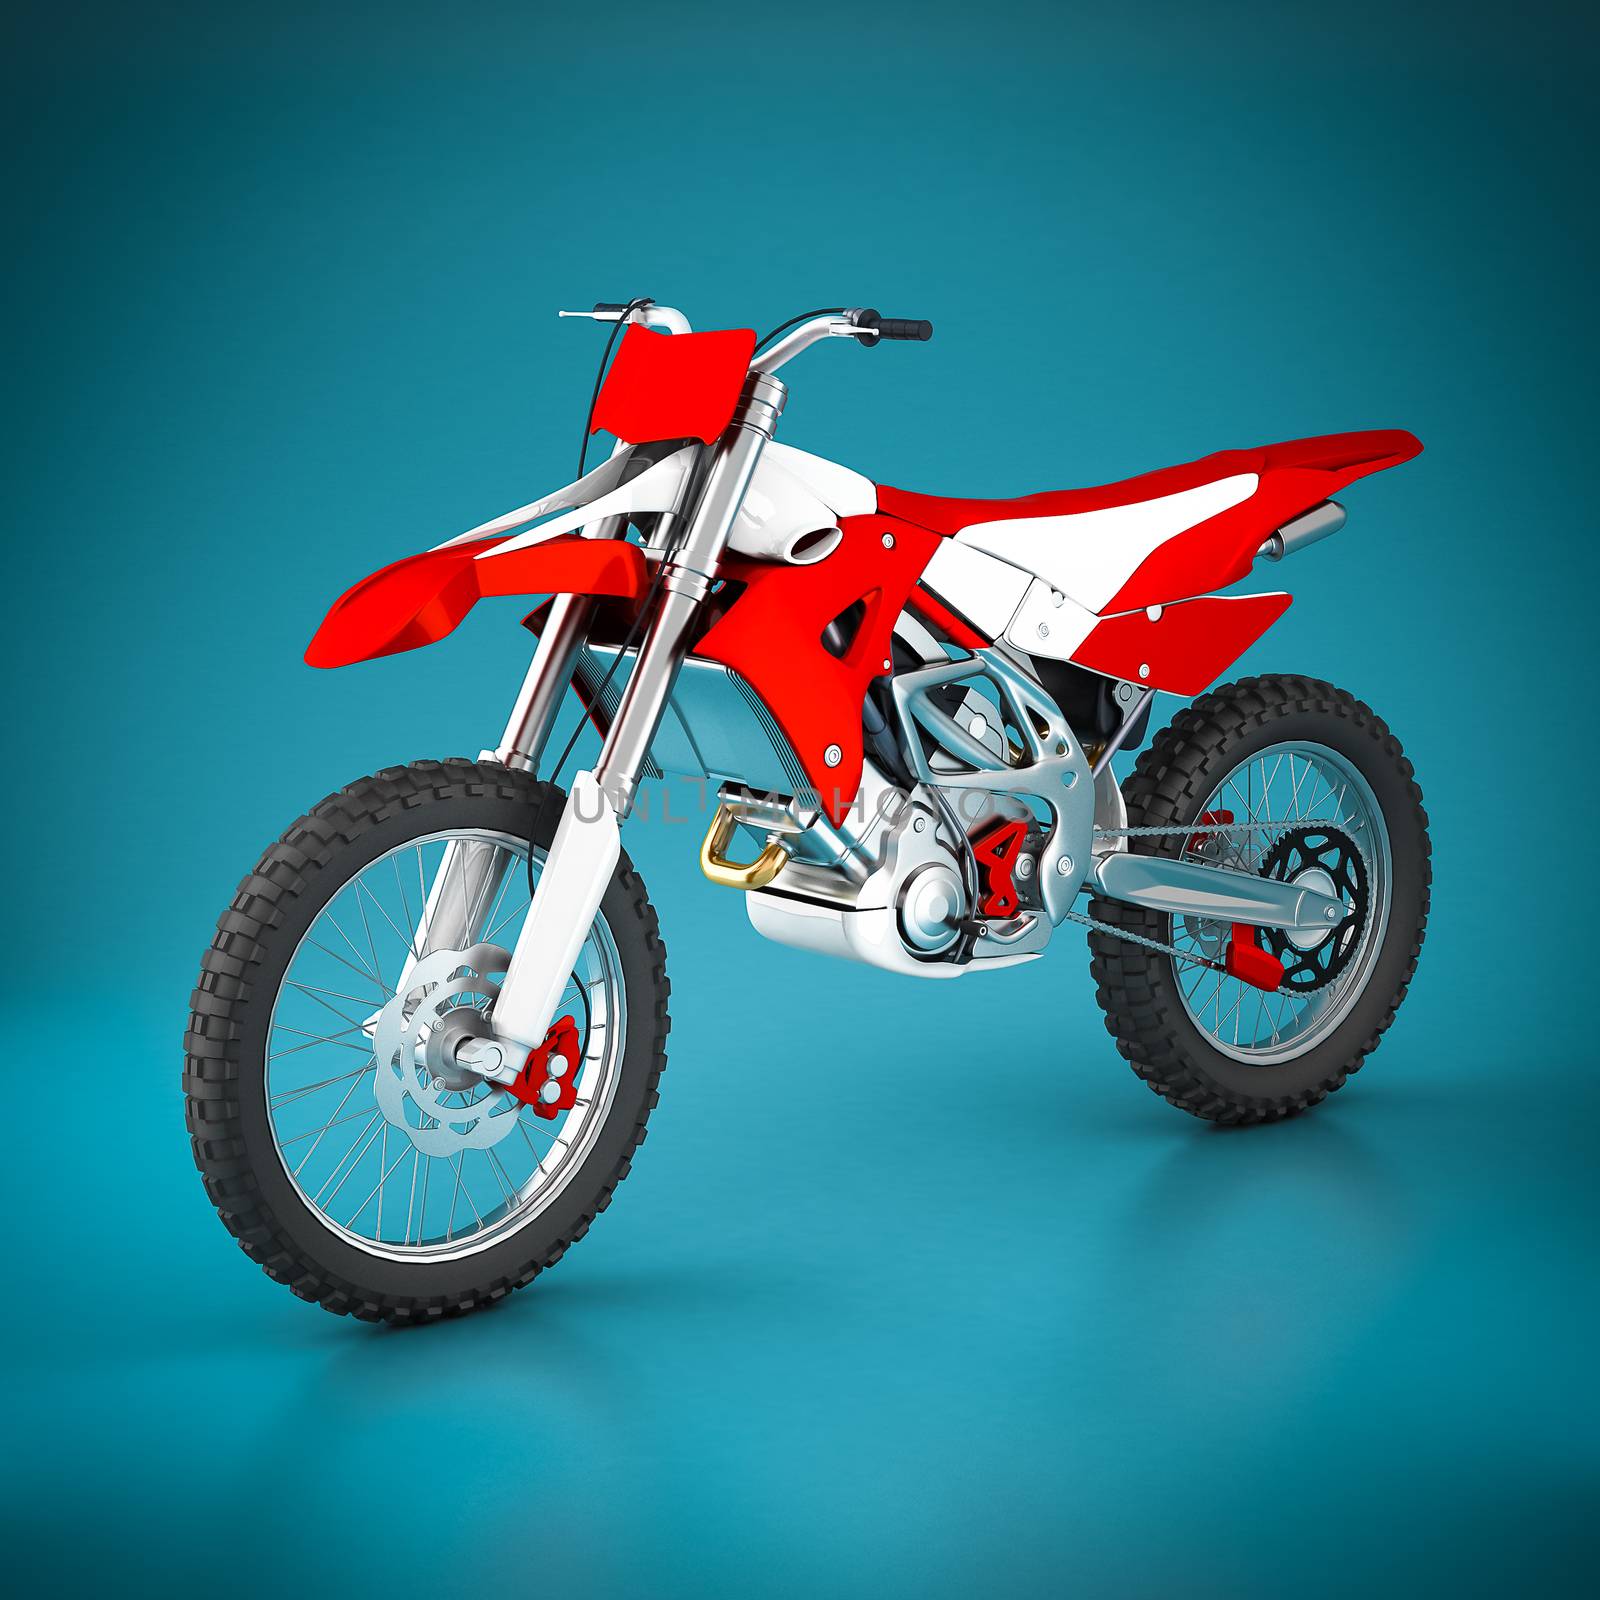 Sport motorcycle on a blue background